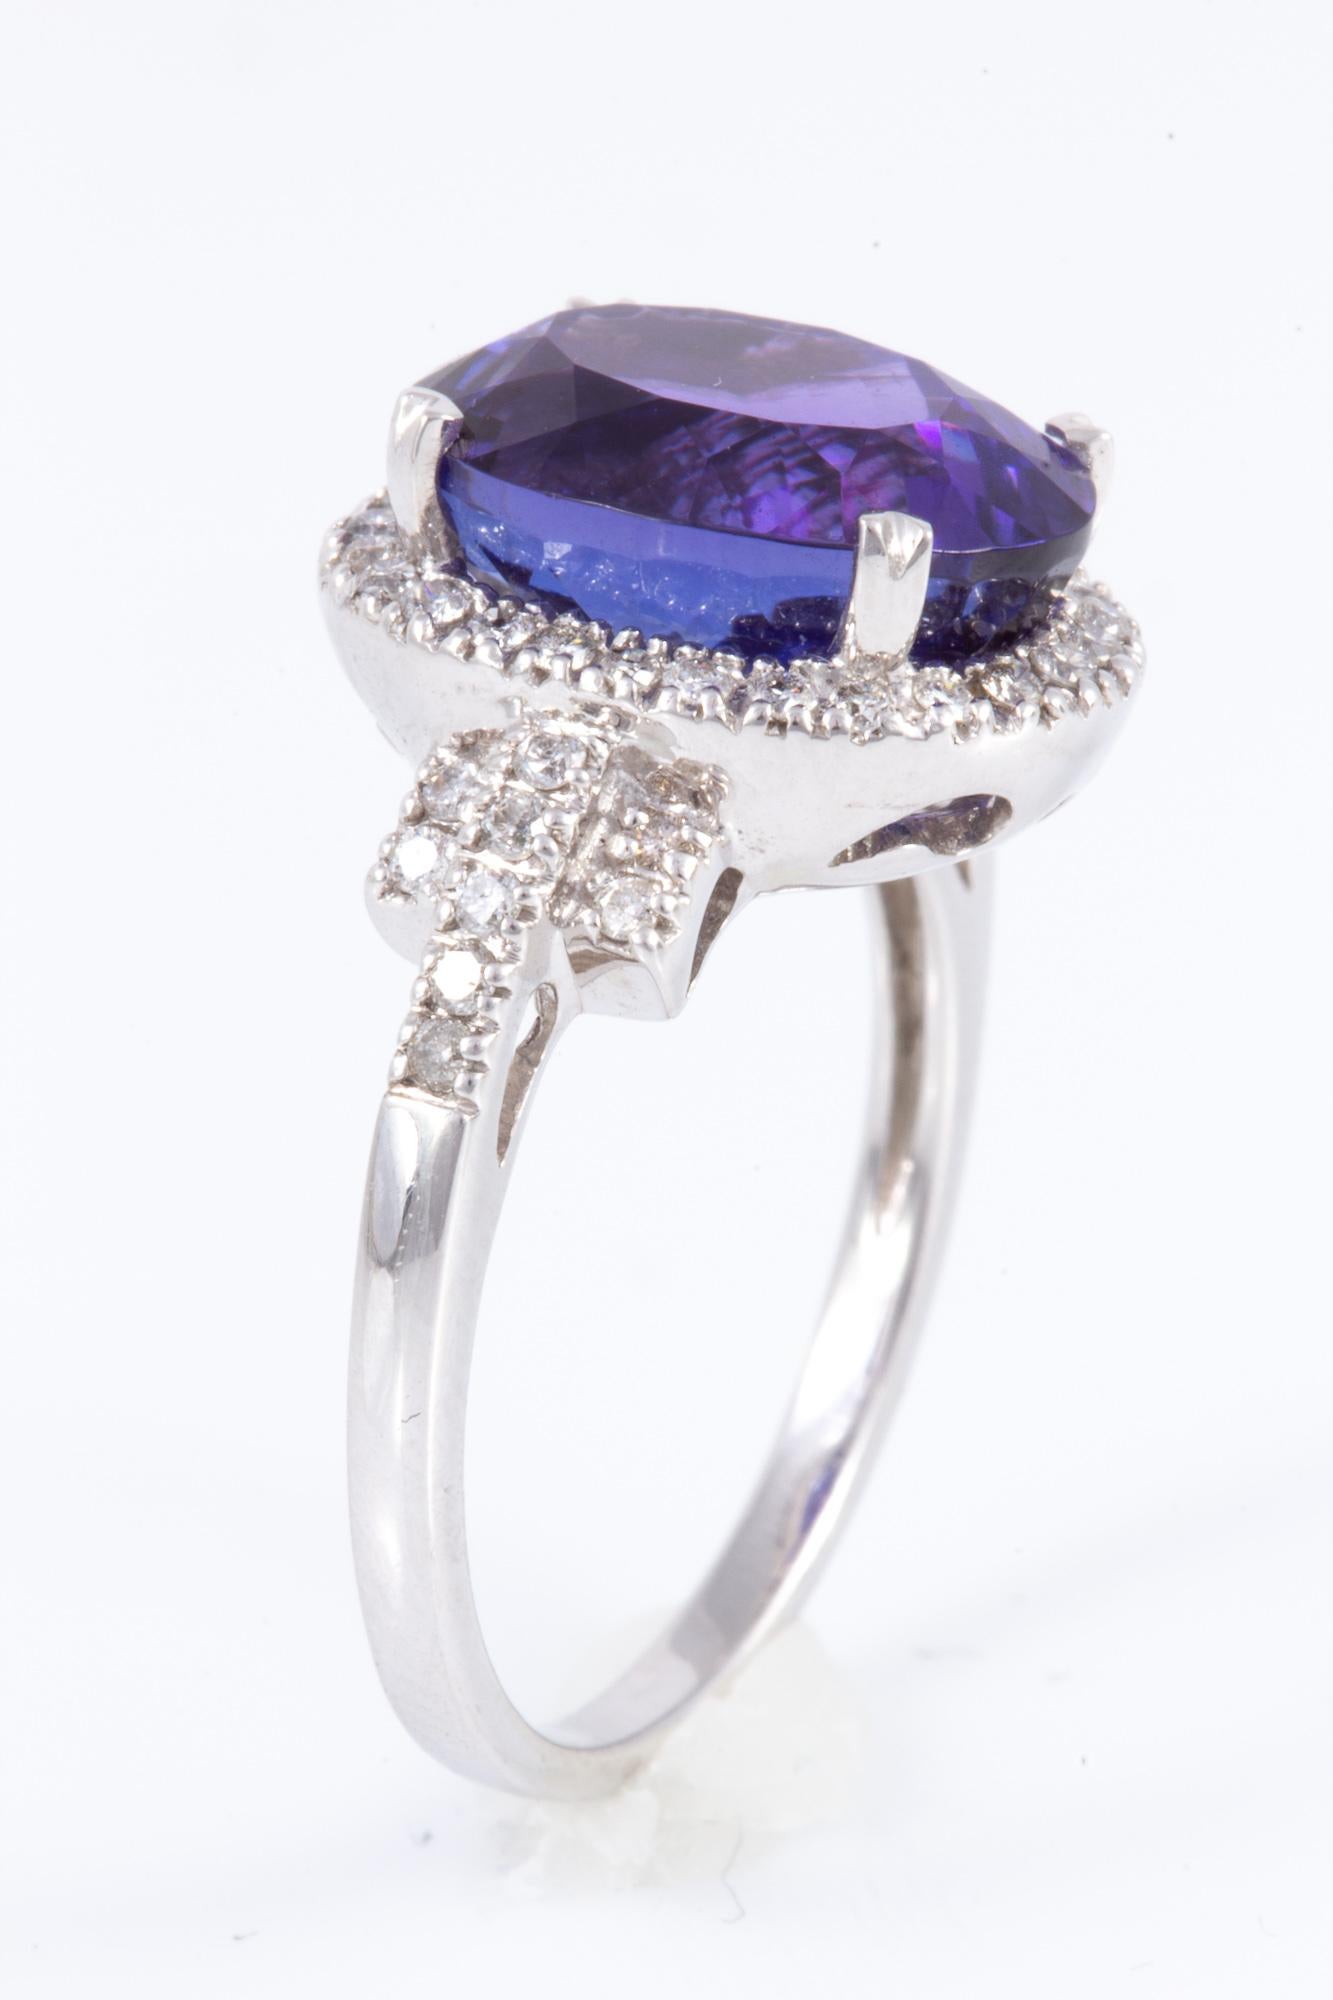 Exceptionally well cut and saturated 6.70 carat oval Tanzanite beautifully balanced with .50 Carats of well cut diamonds. Set in 14 karat gold and made in America! The perfect combination of cut and color.  

Presented by the noted jewelry firm of